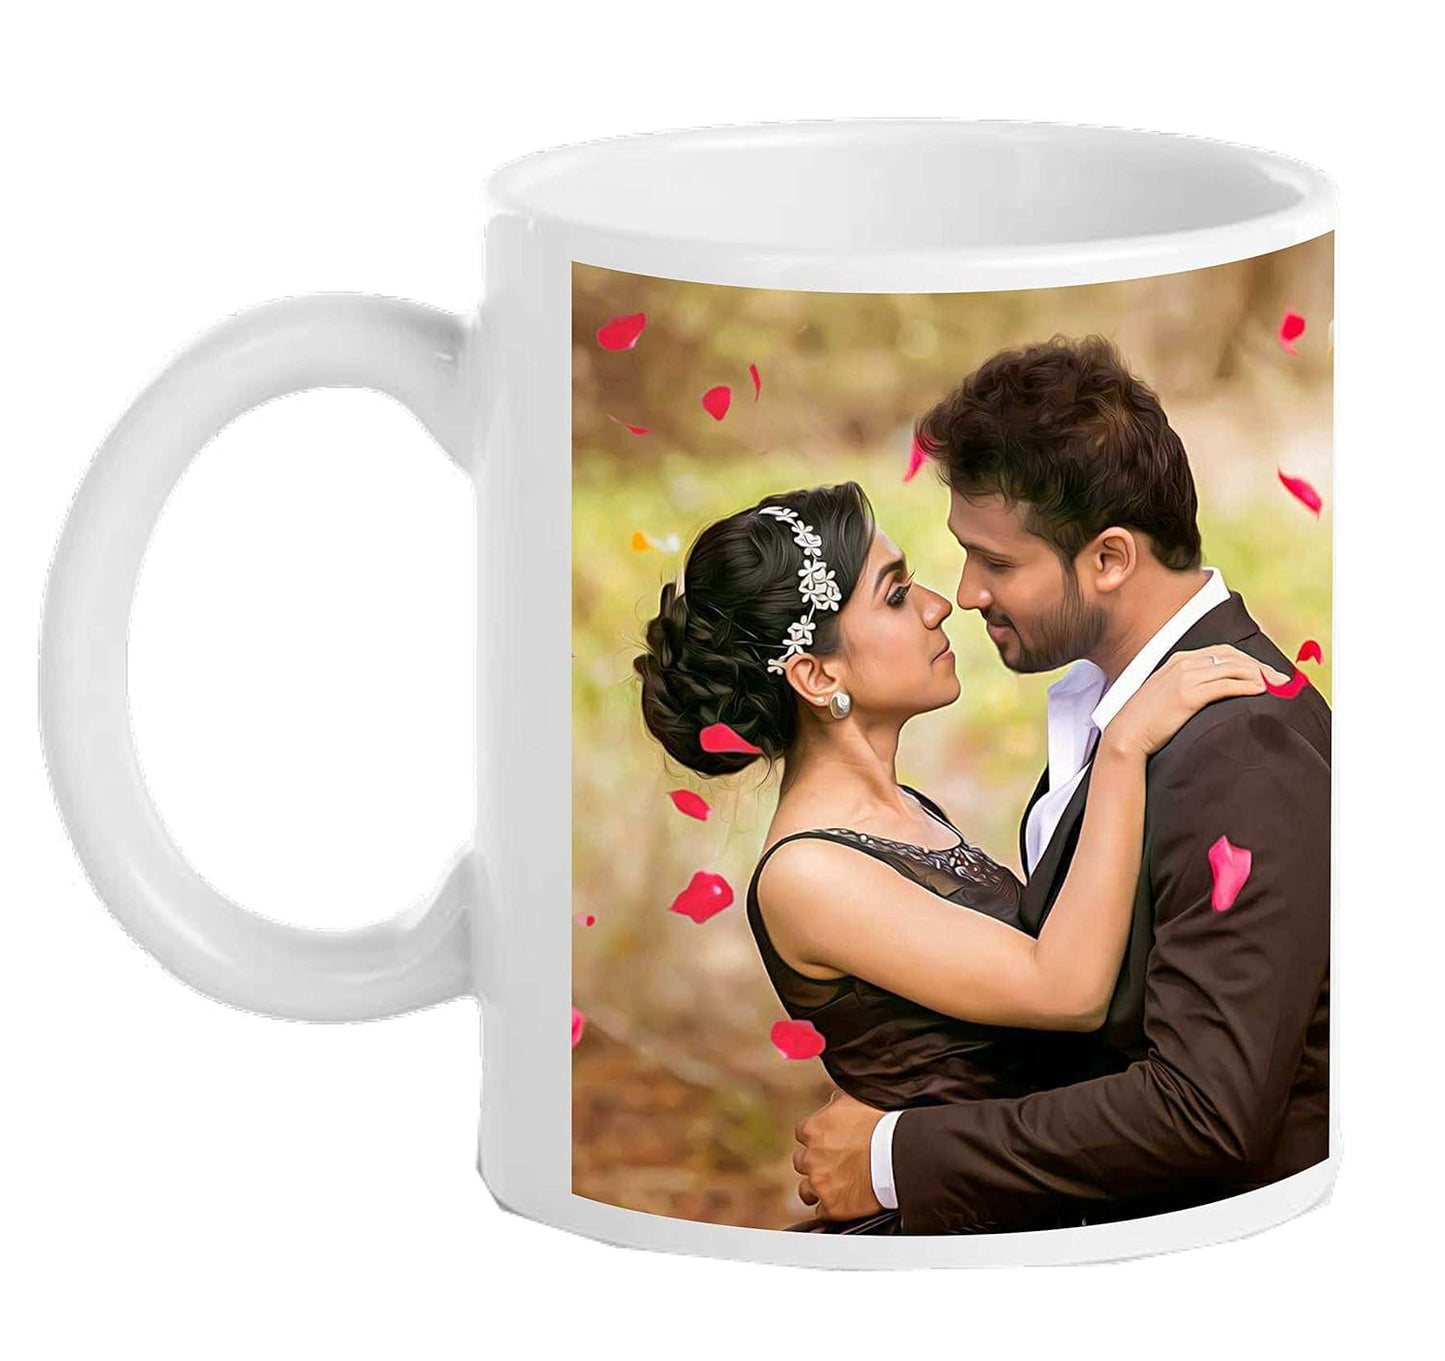 Personalized / customized Coffee Mug for loved ones